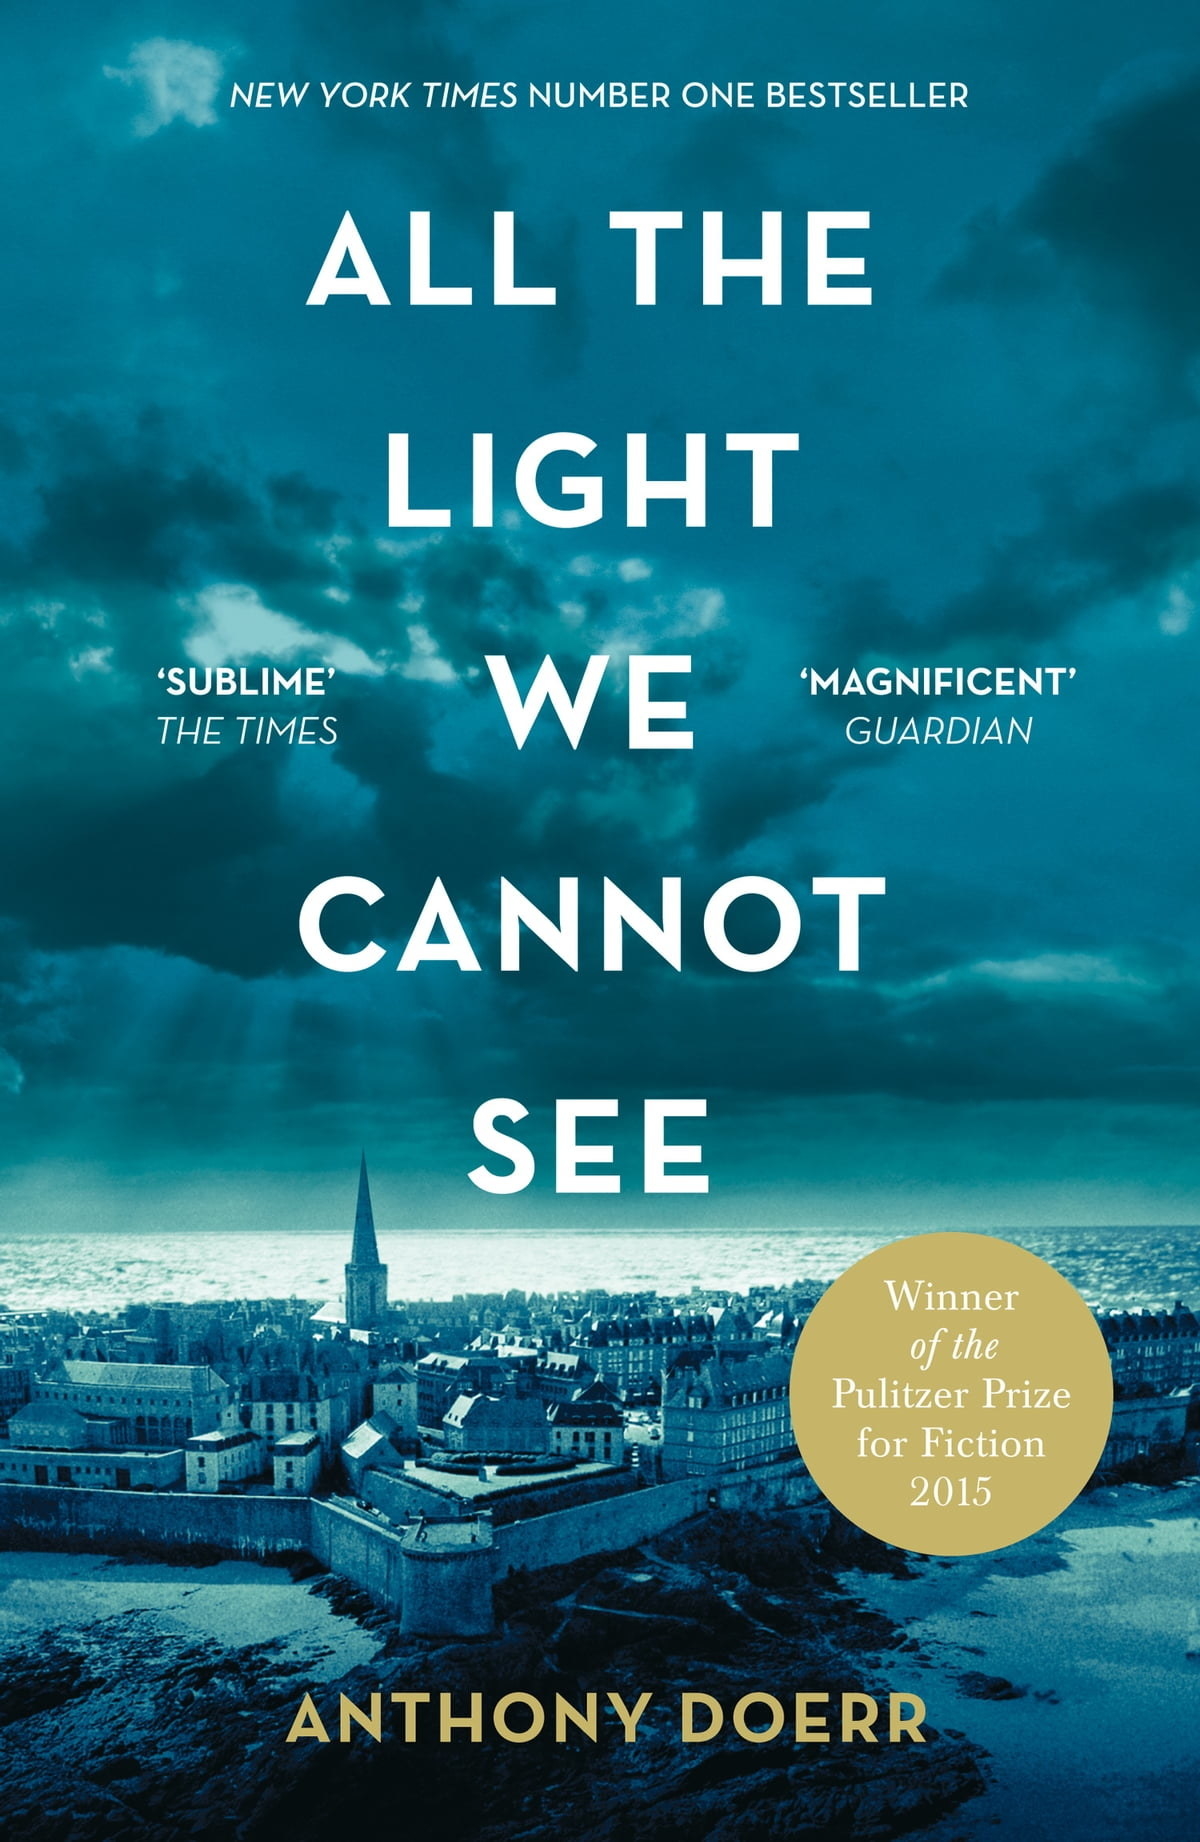 &quot;All the Light We Cannot See&quot; by Anthony Doerr